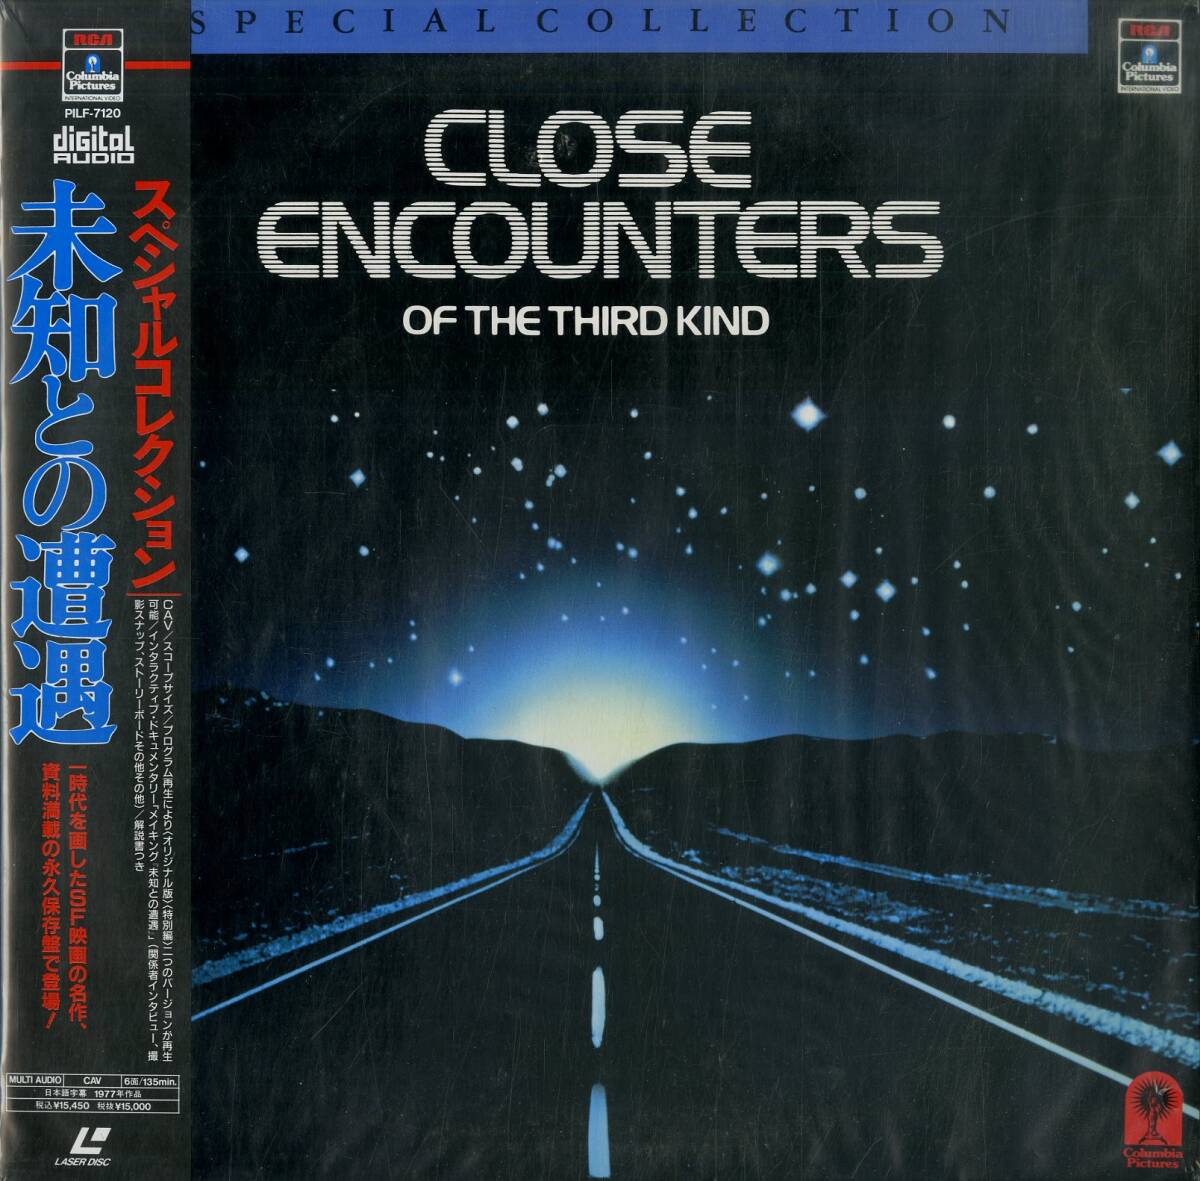 B00156402/LD3枚組/リチャード・ドレイファス「未知との遭遇 Close Encounters Of The Third Kind Special Collection 1980 (1991年・PILの画像1